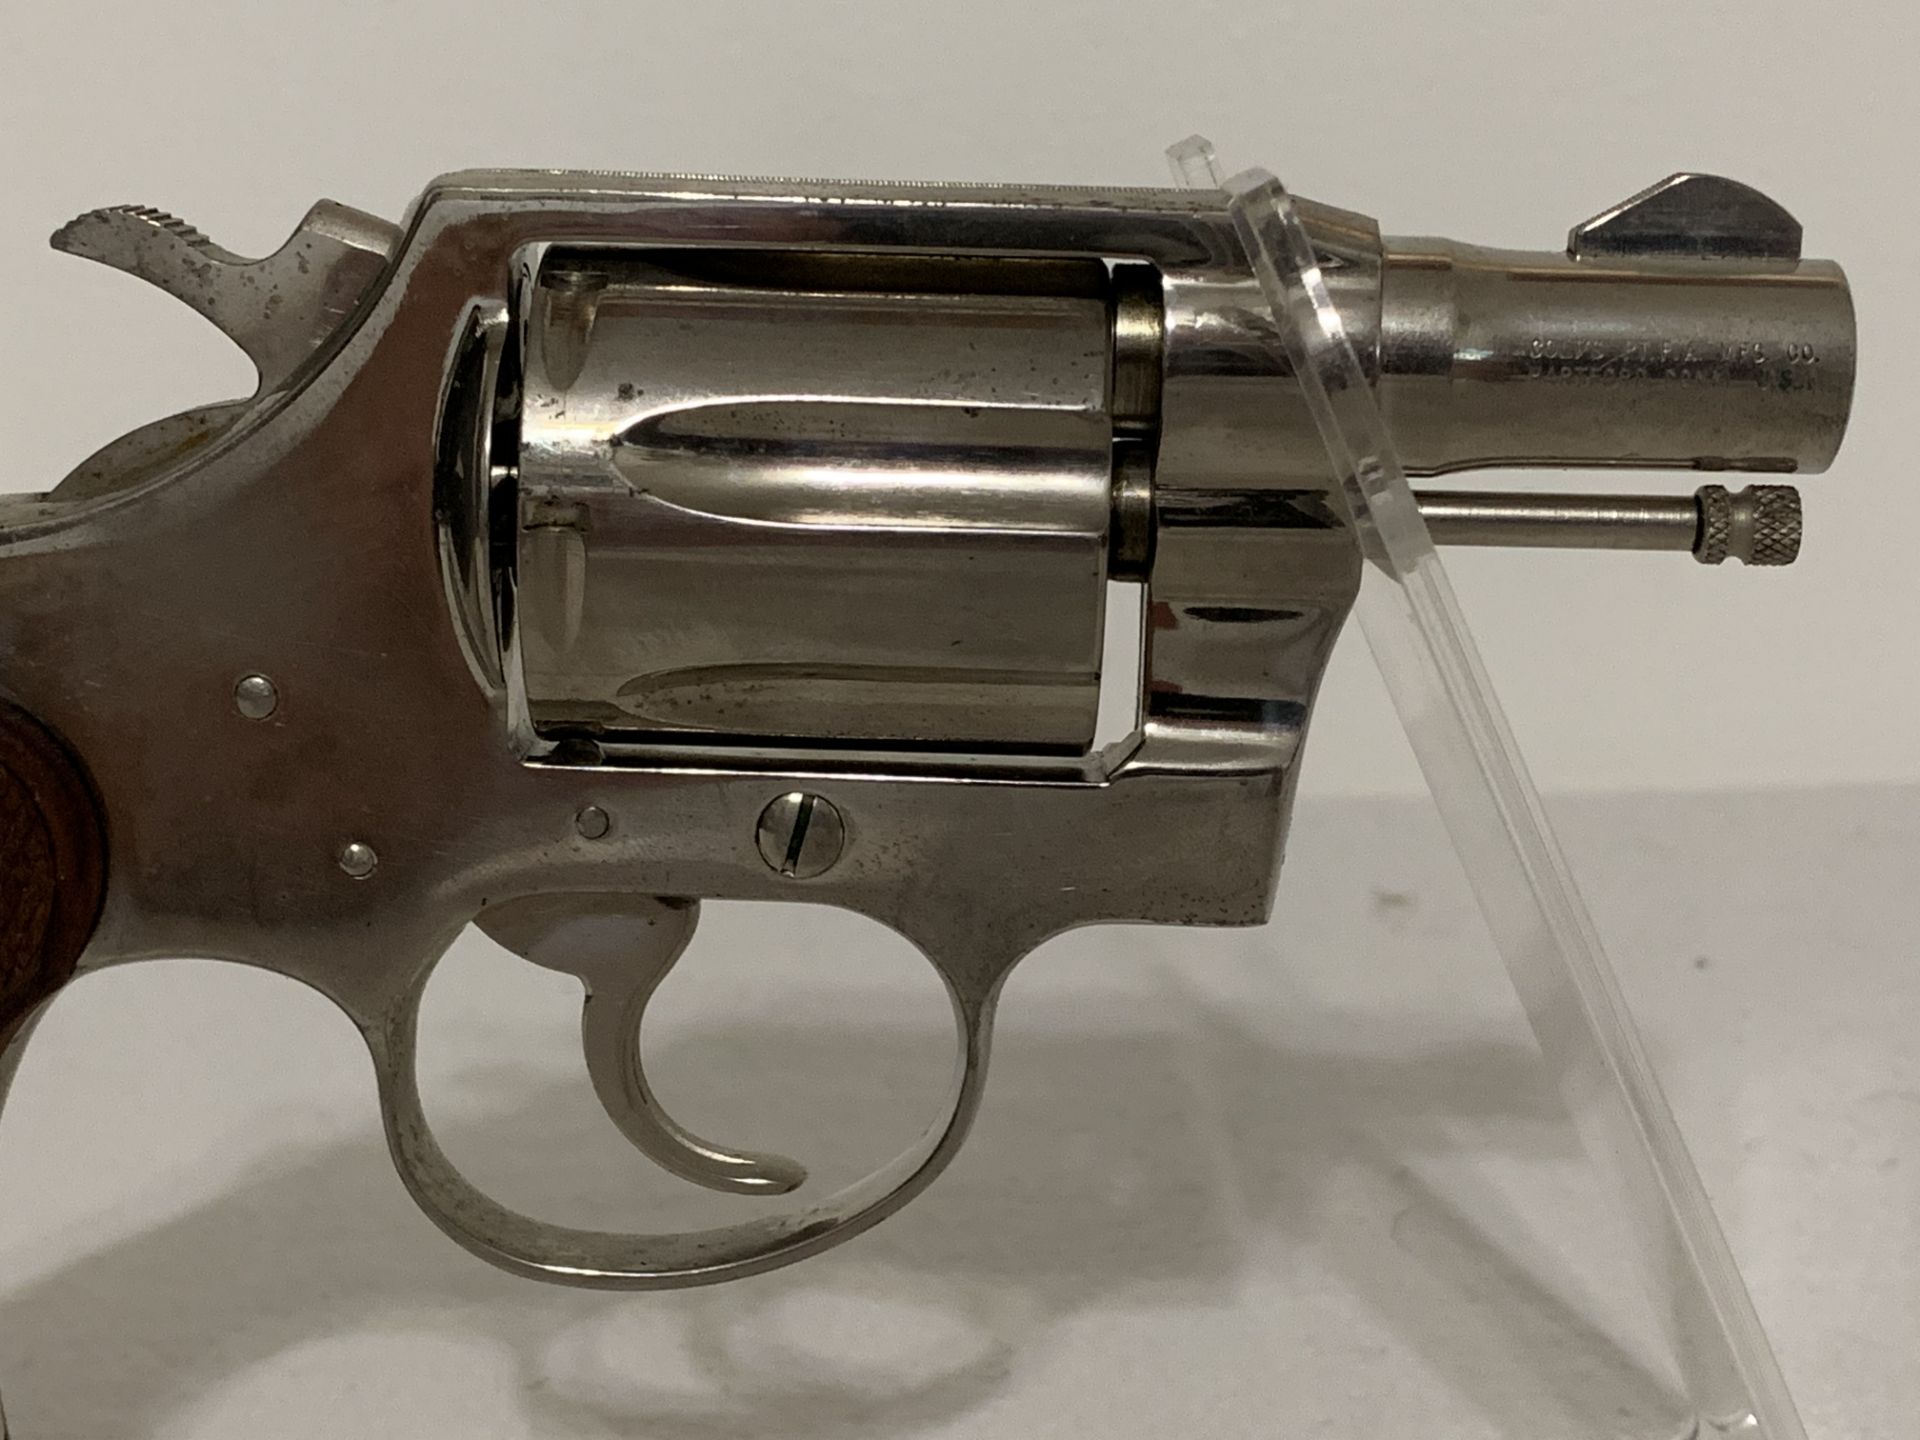 COLT DETECTIVE SPECIAL PISTOL - 38 CAL - NICKEL - WITH ORIGINAL 1971 GRIPS (FOB HOLLYWOOD, FL) - Image 2 of 11